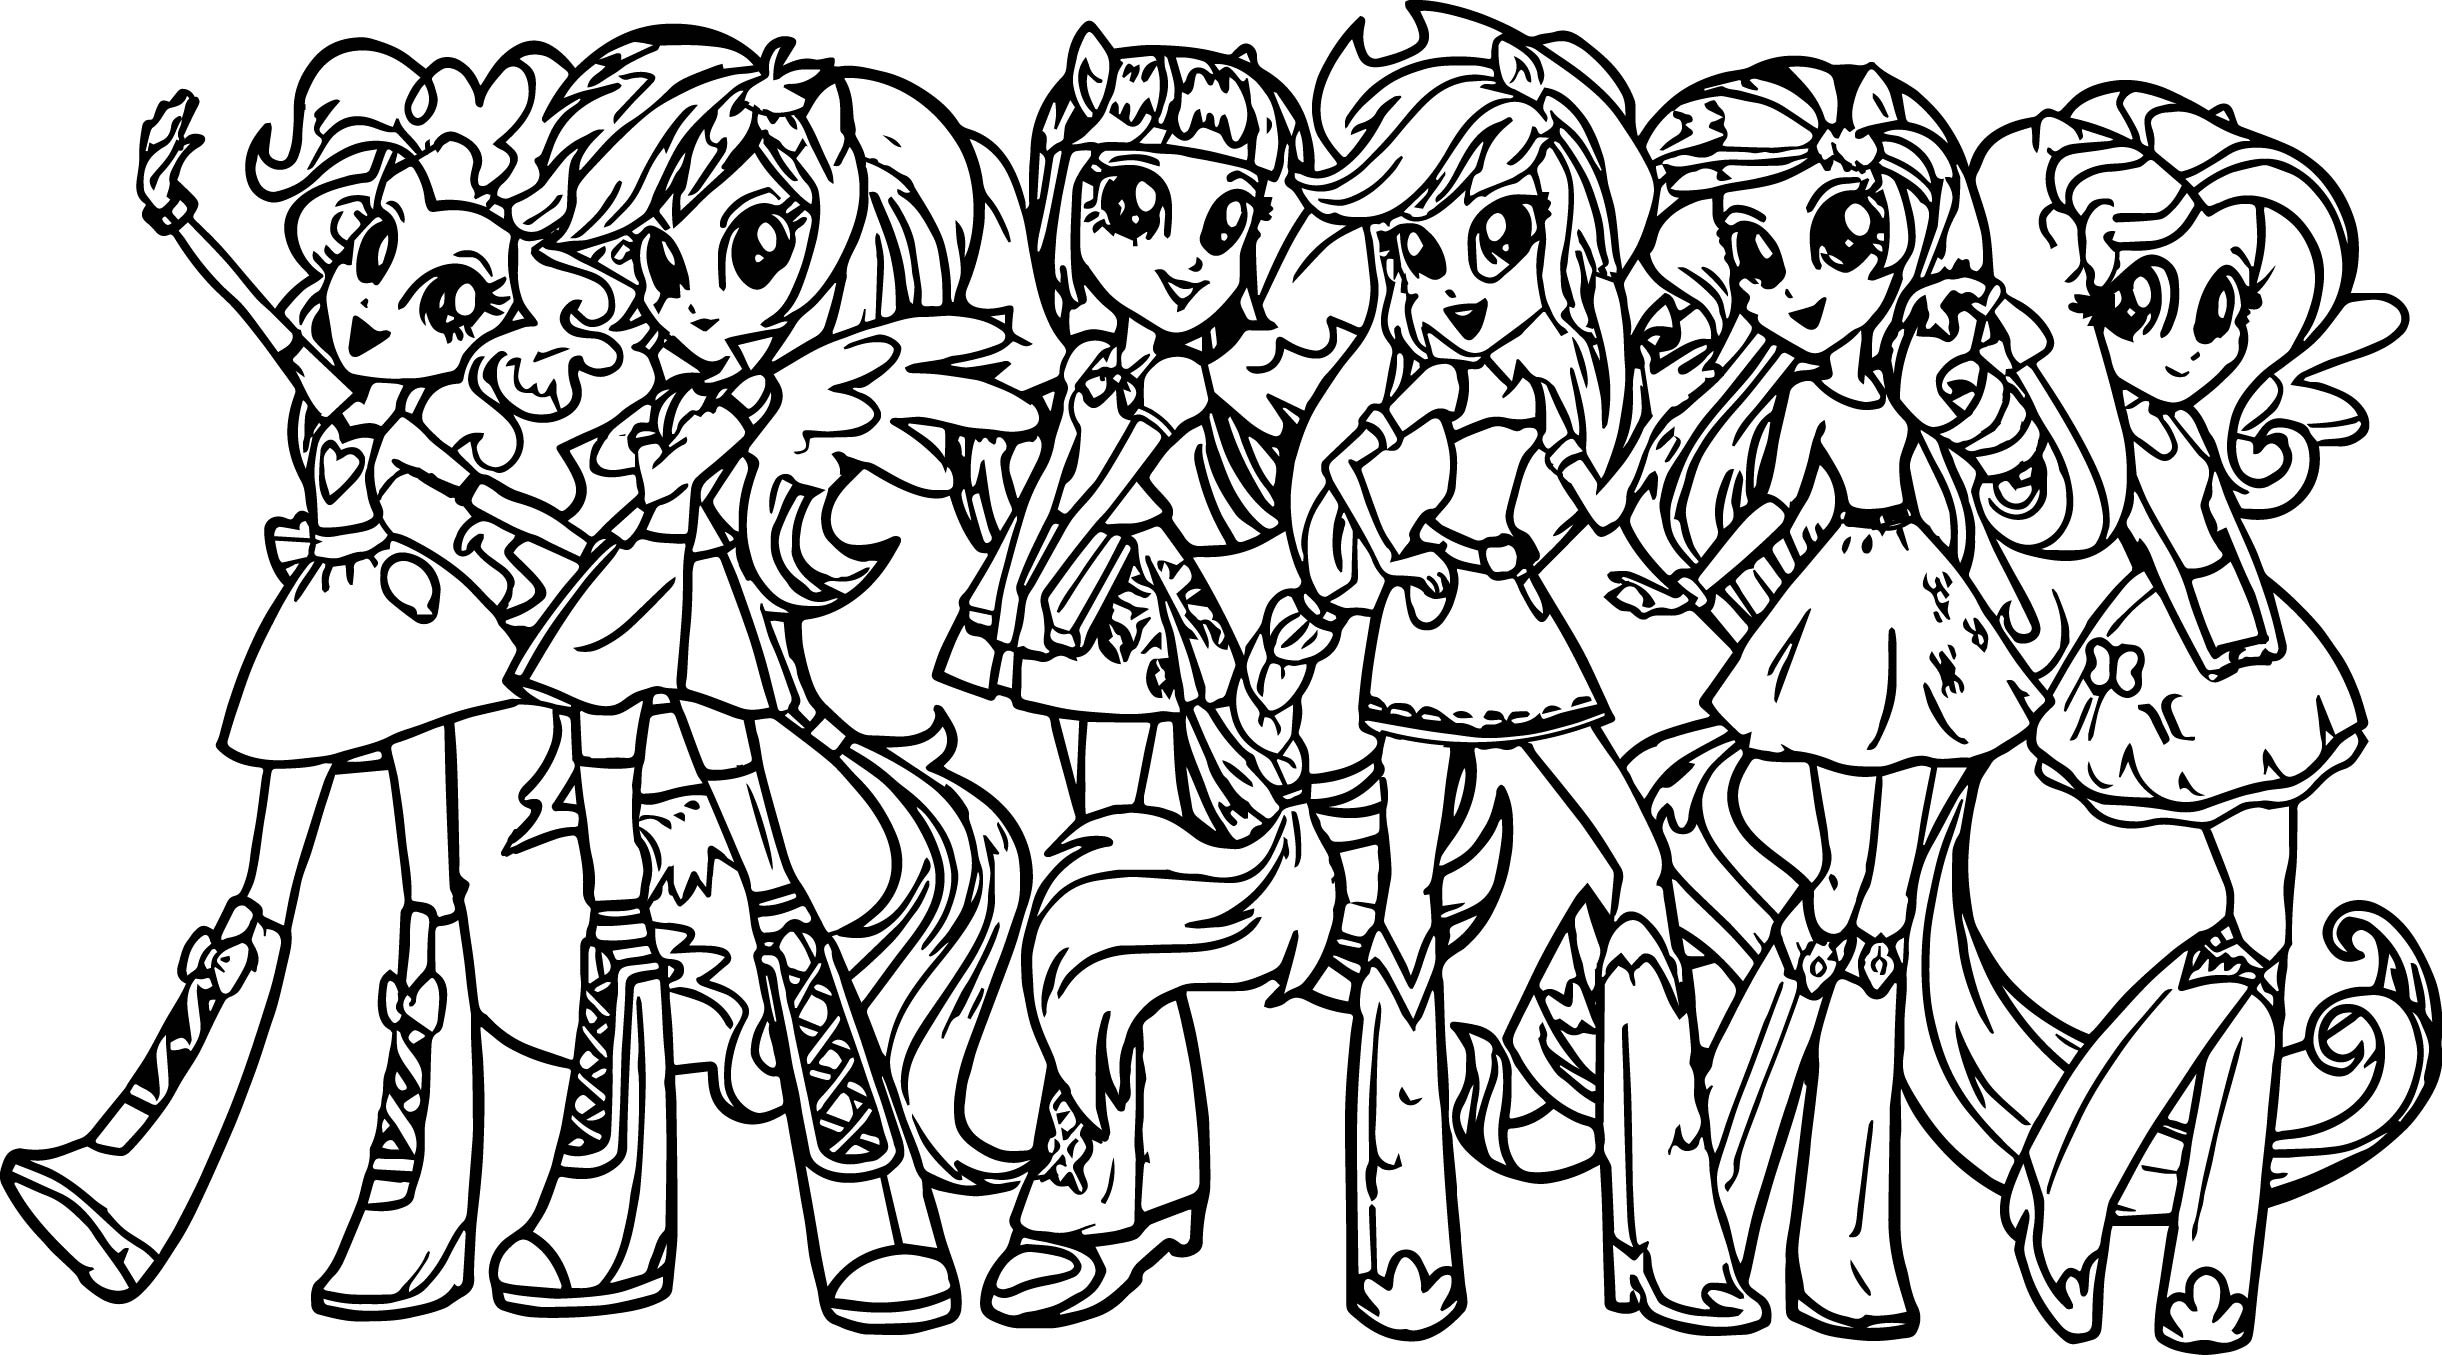 Coloring Sheets For Girls My Little Pony
 My Little Pony Girls Coloring Page